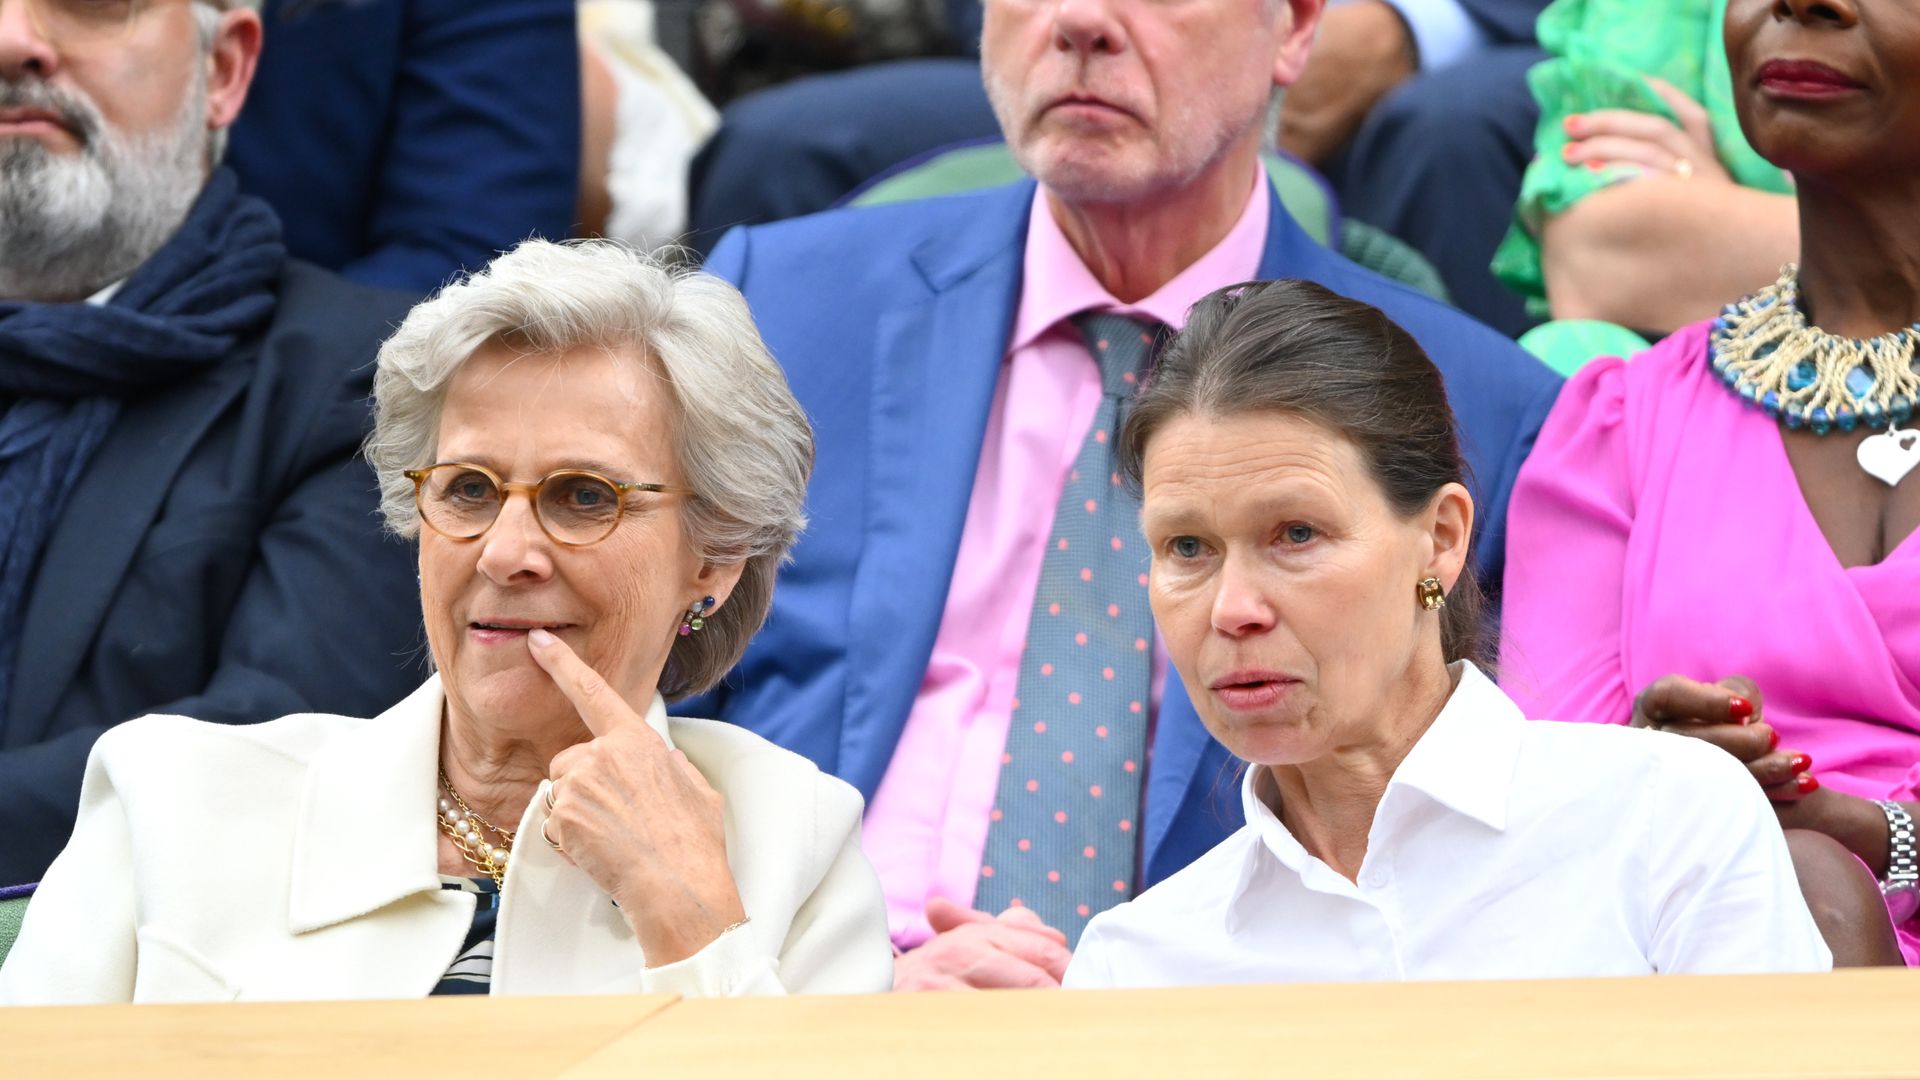 Birgitte, Duchess of Gloucester sat with Lady Sarah Chatto